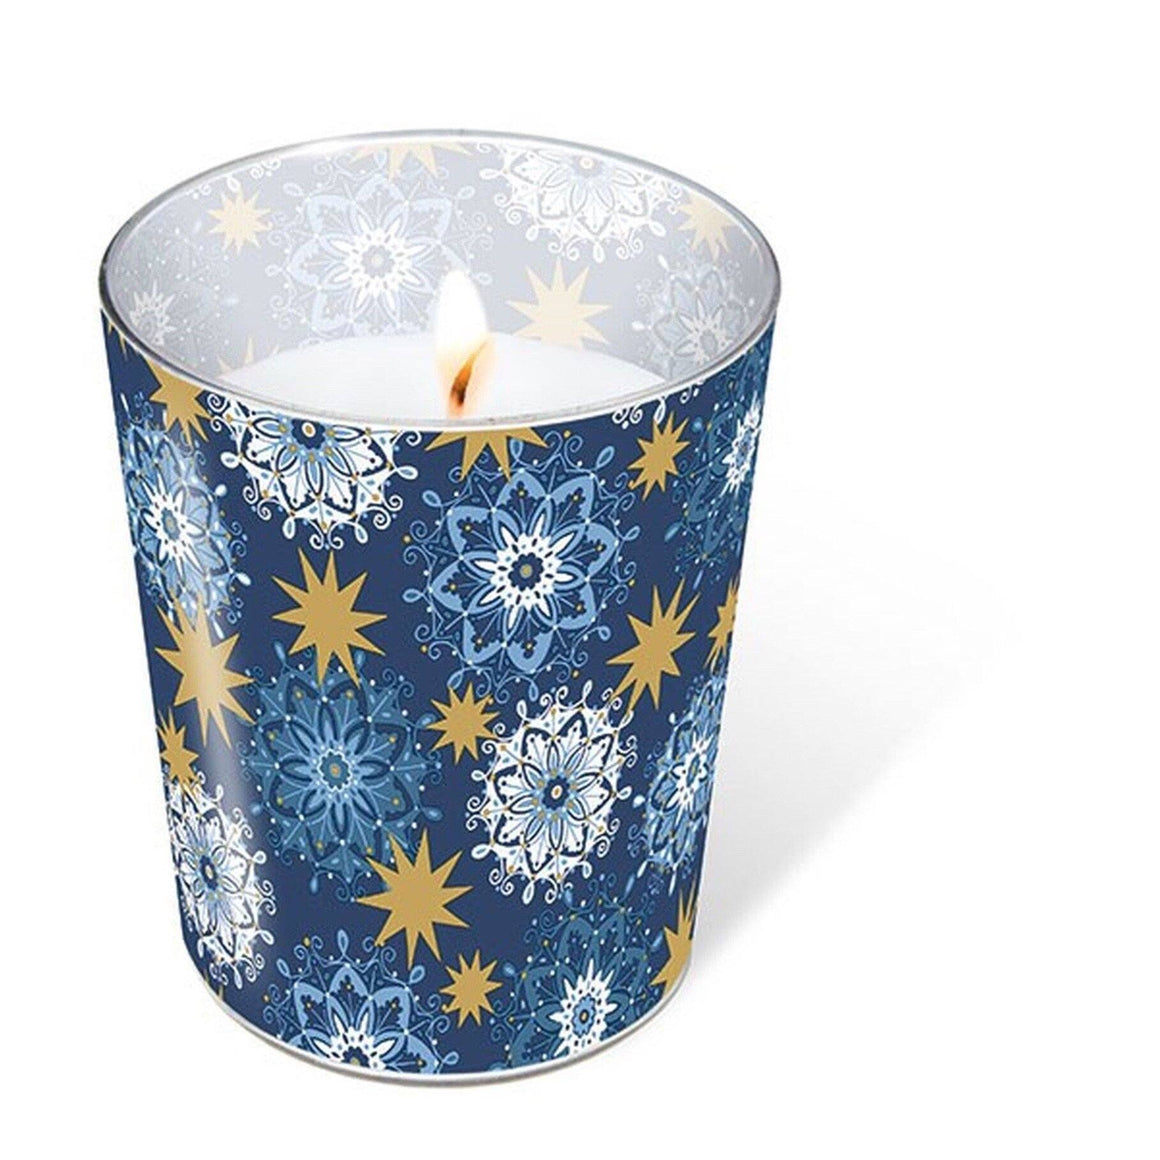 HOME - EUROPEAN GLASS CANDLE - FILIGREE STARS, HOME, Old Country Design - Bon + Co. Party Studio